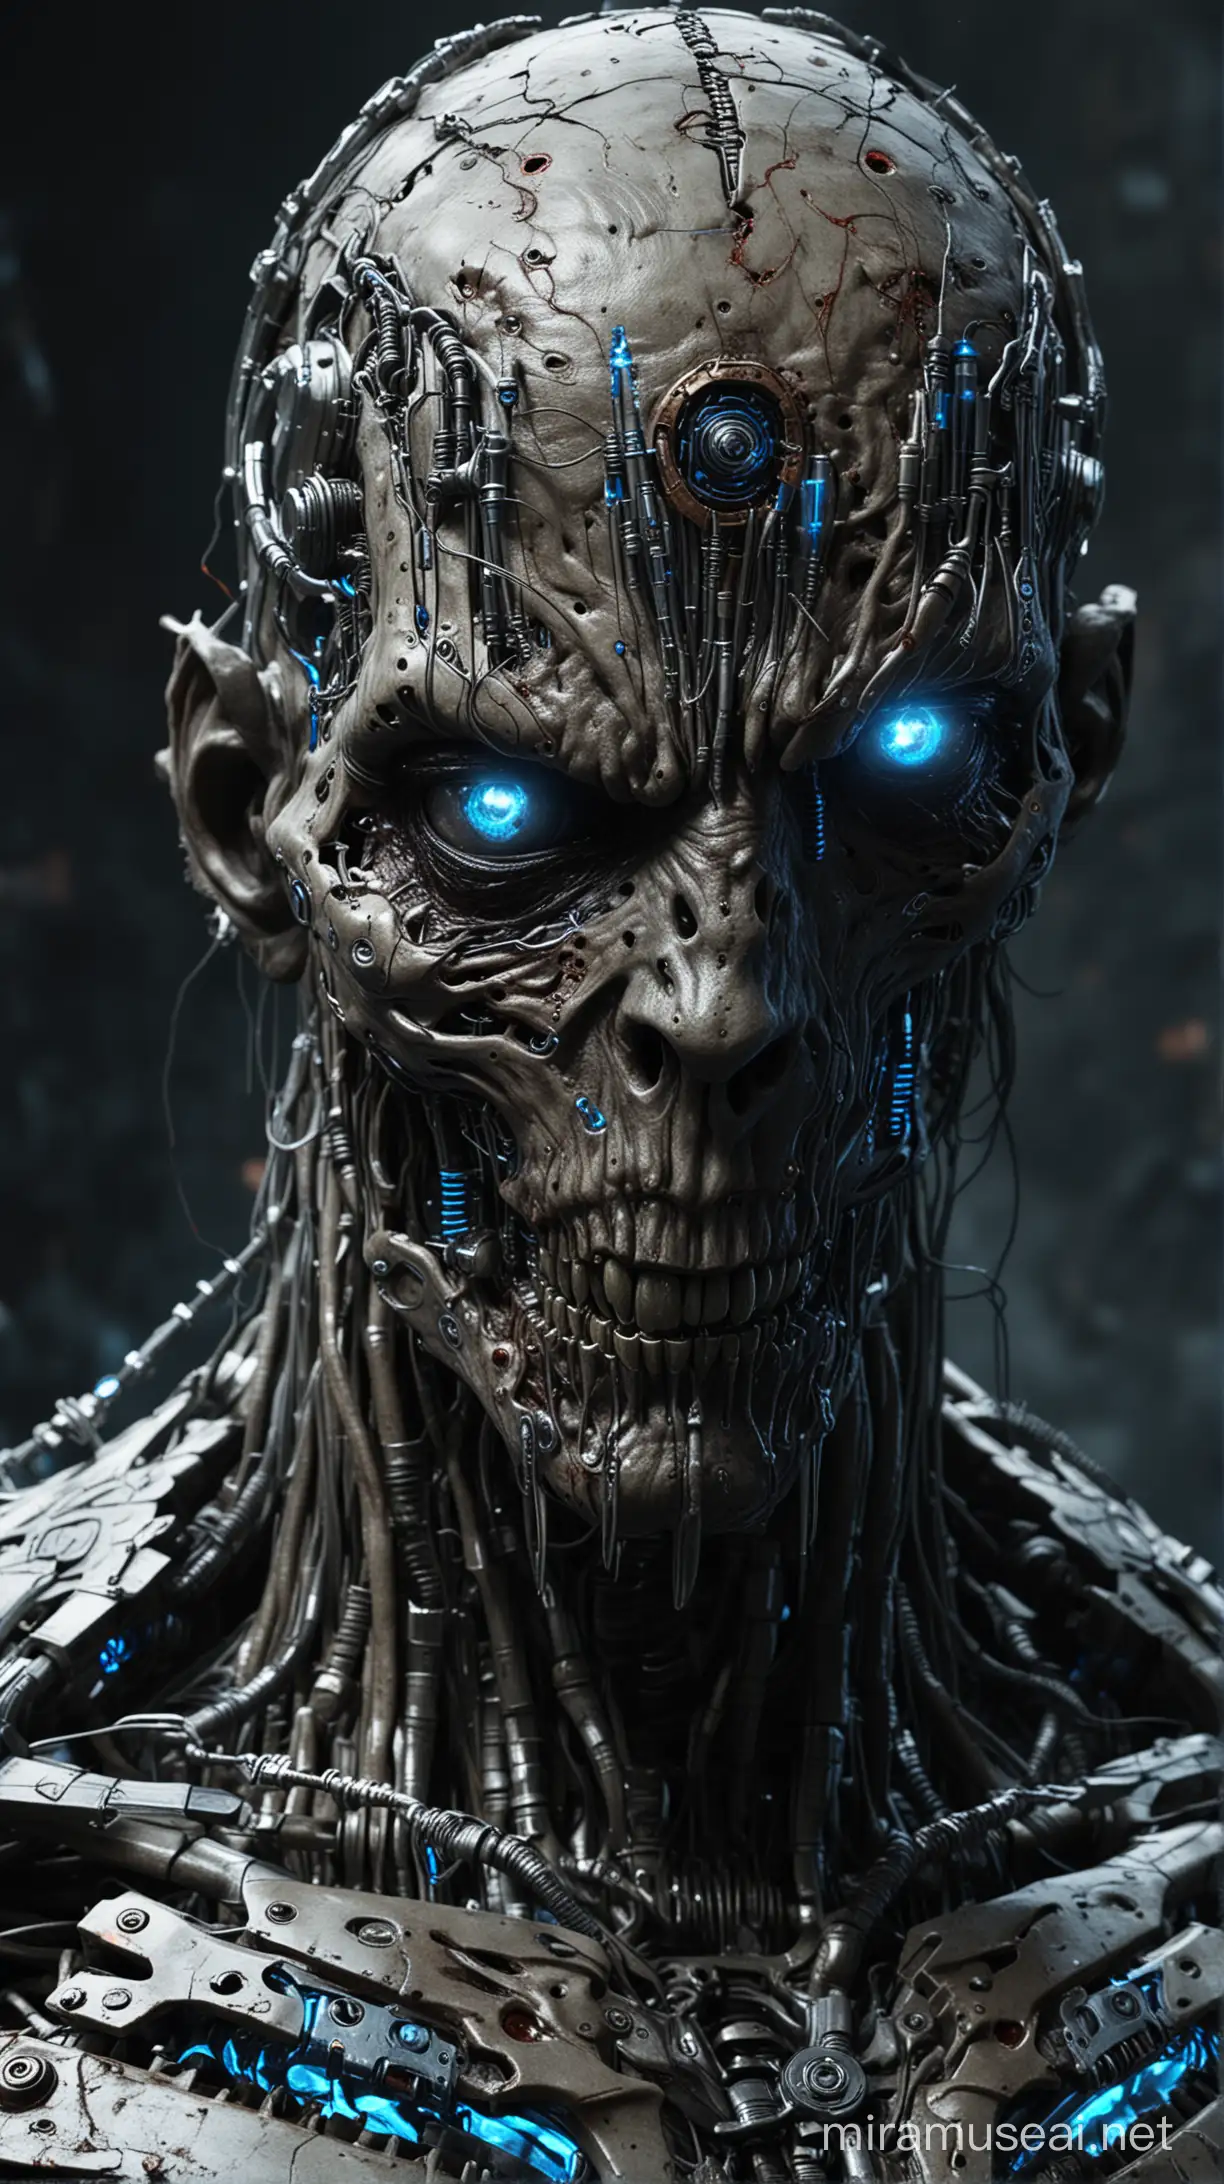 A cybernetically enhanced zombie with glowing blue eyes and metallic claws, gory details and exposed wires, intense close-up shot with a dark, futuristic background. High-definition rendering with intricate mechanical components and eerie, otherworldly aura.